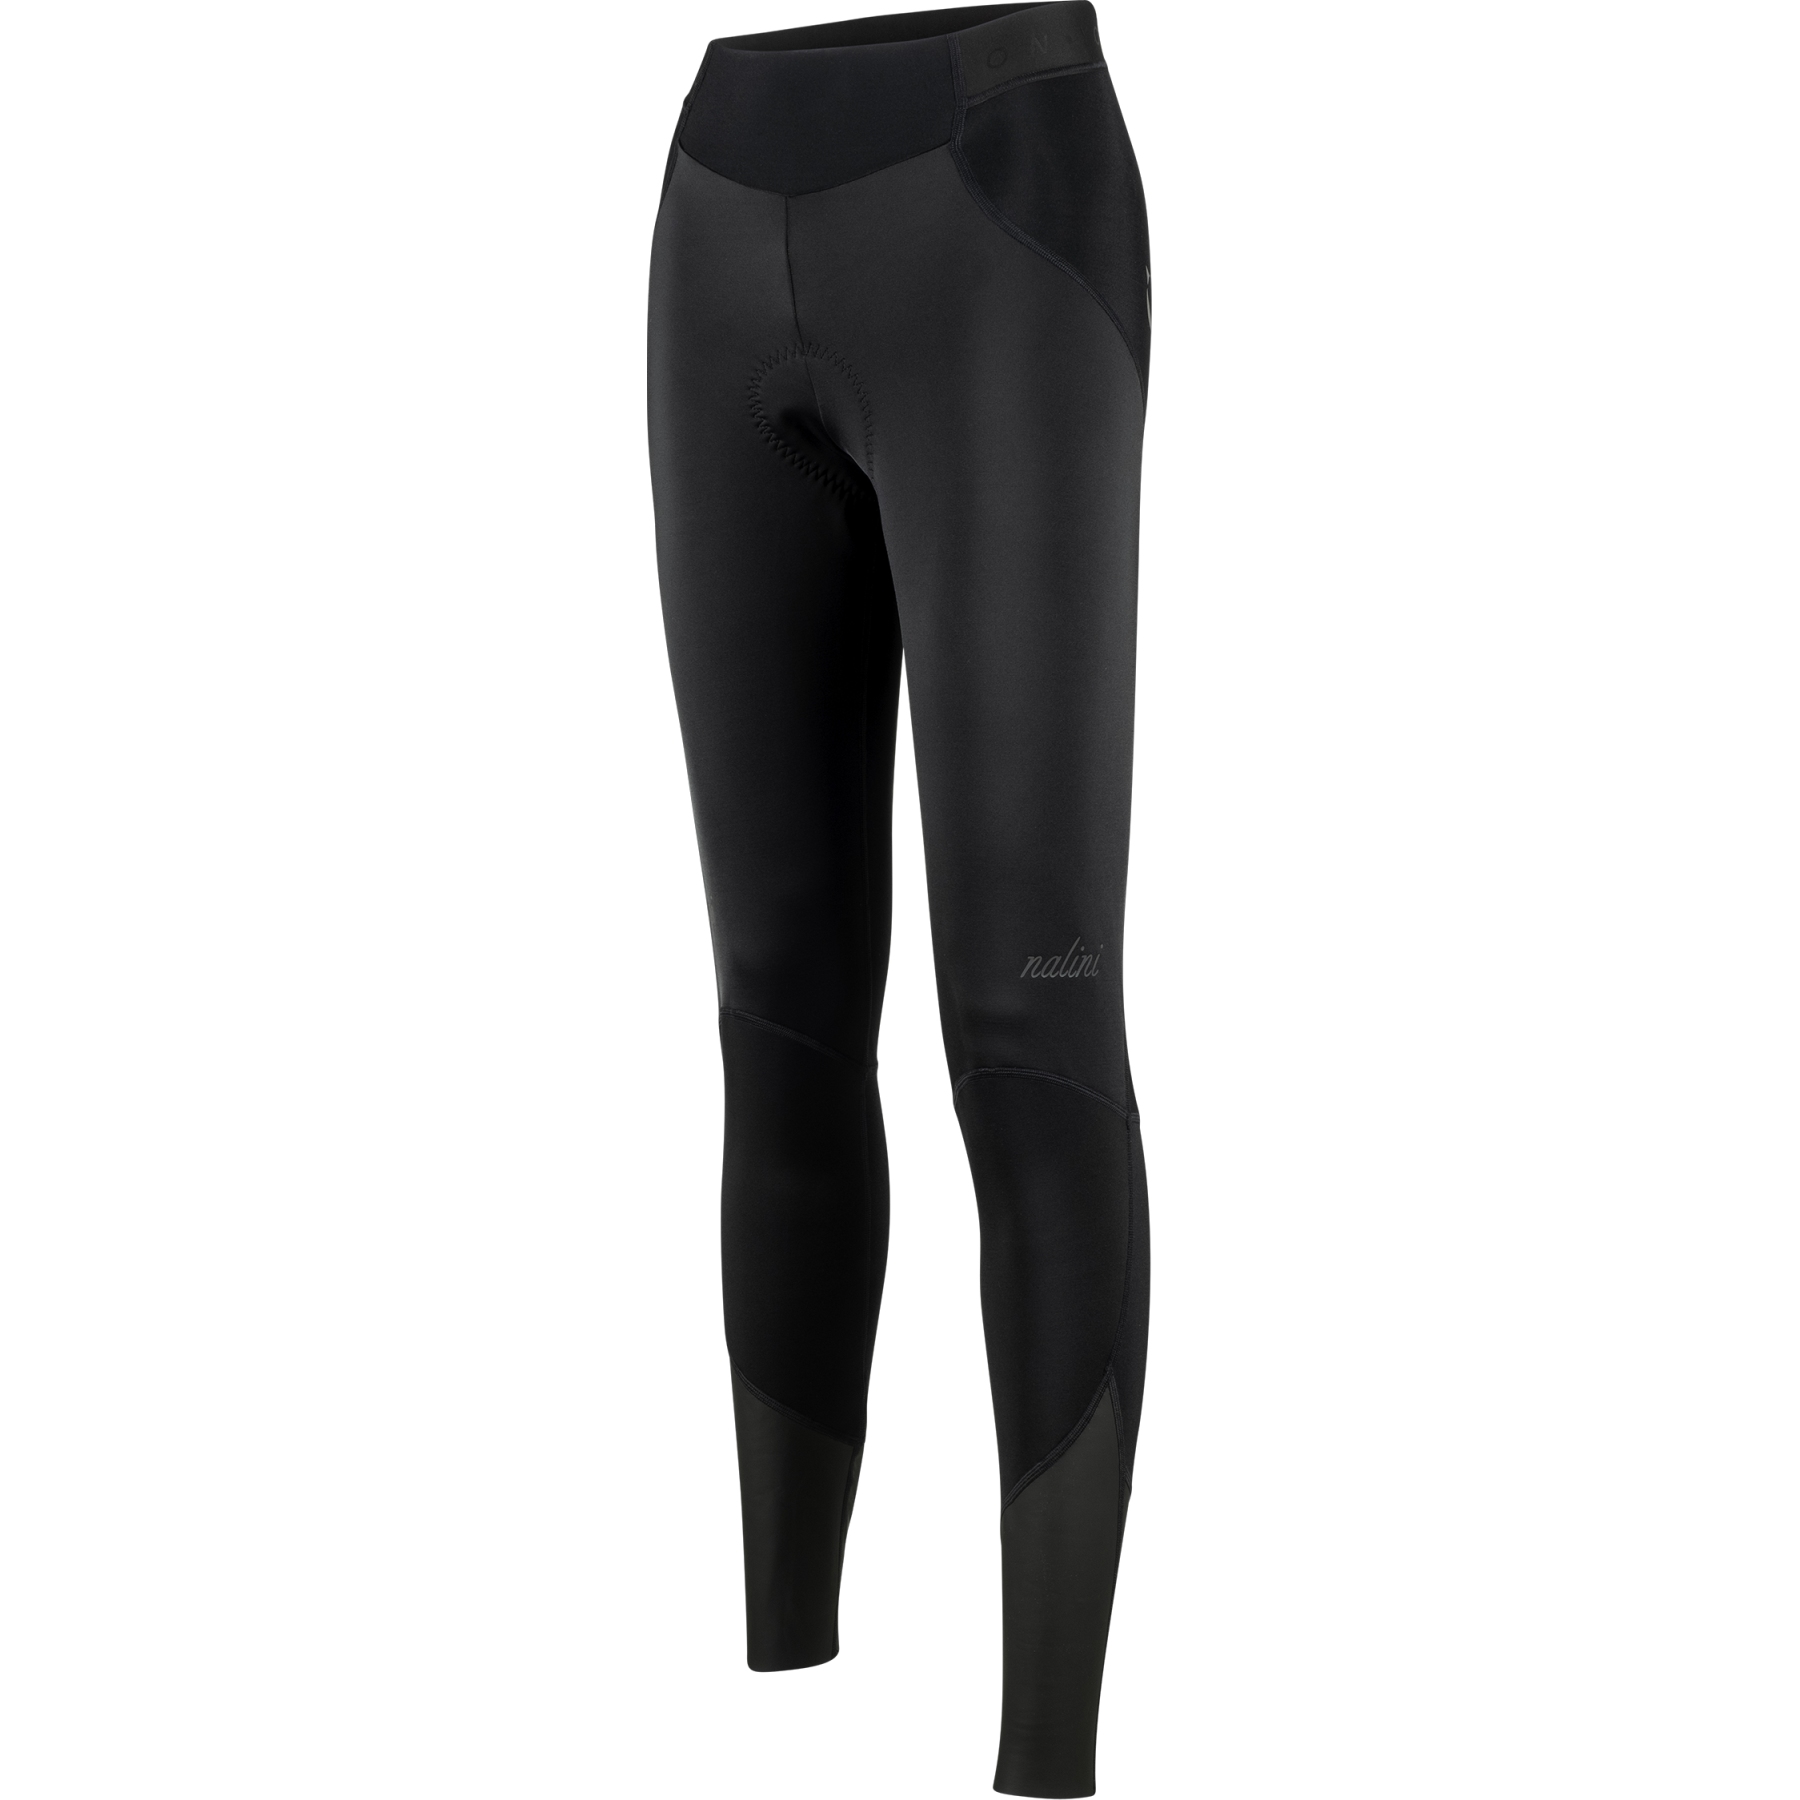 Picture of Nalini Road Wind Lady Tights - black 4000